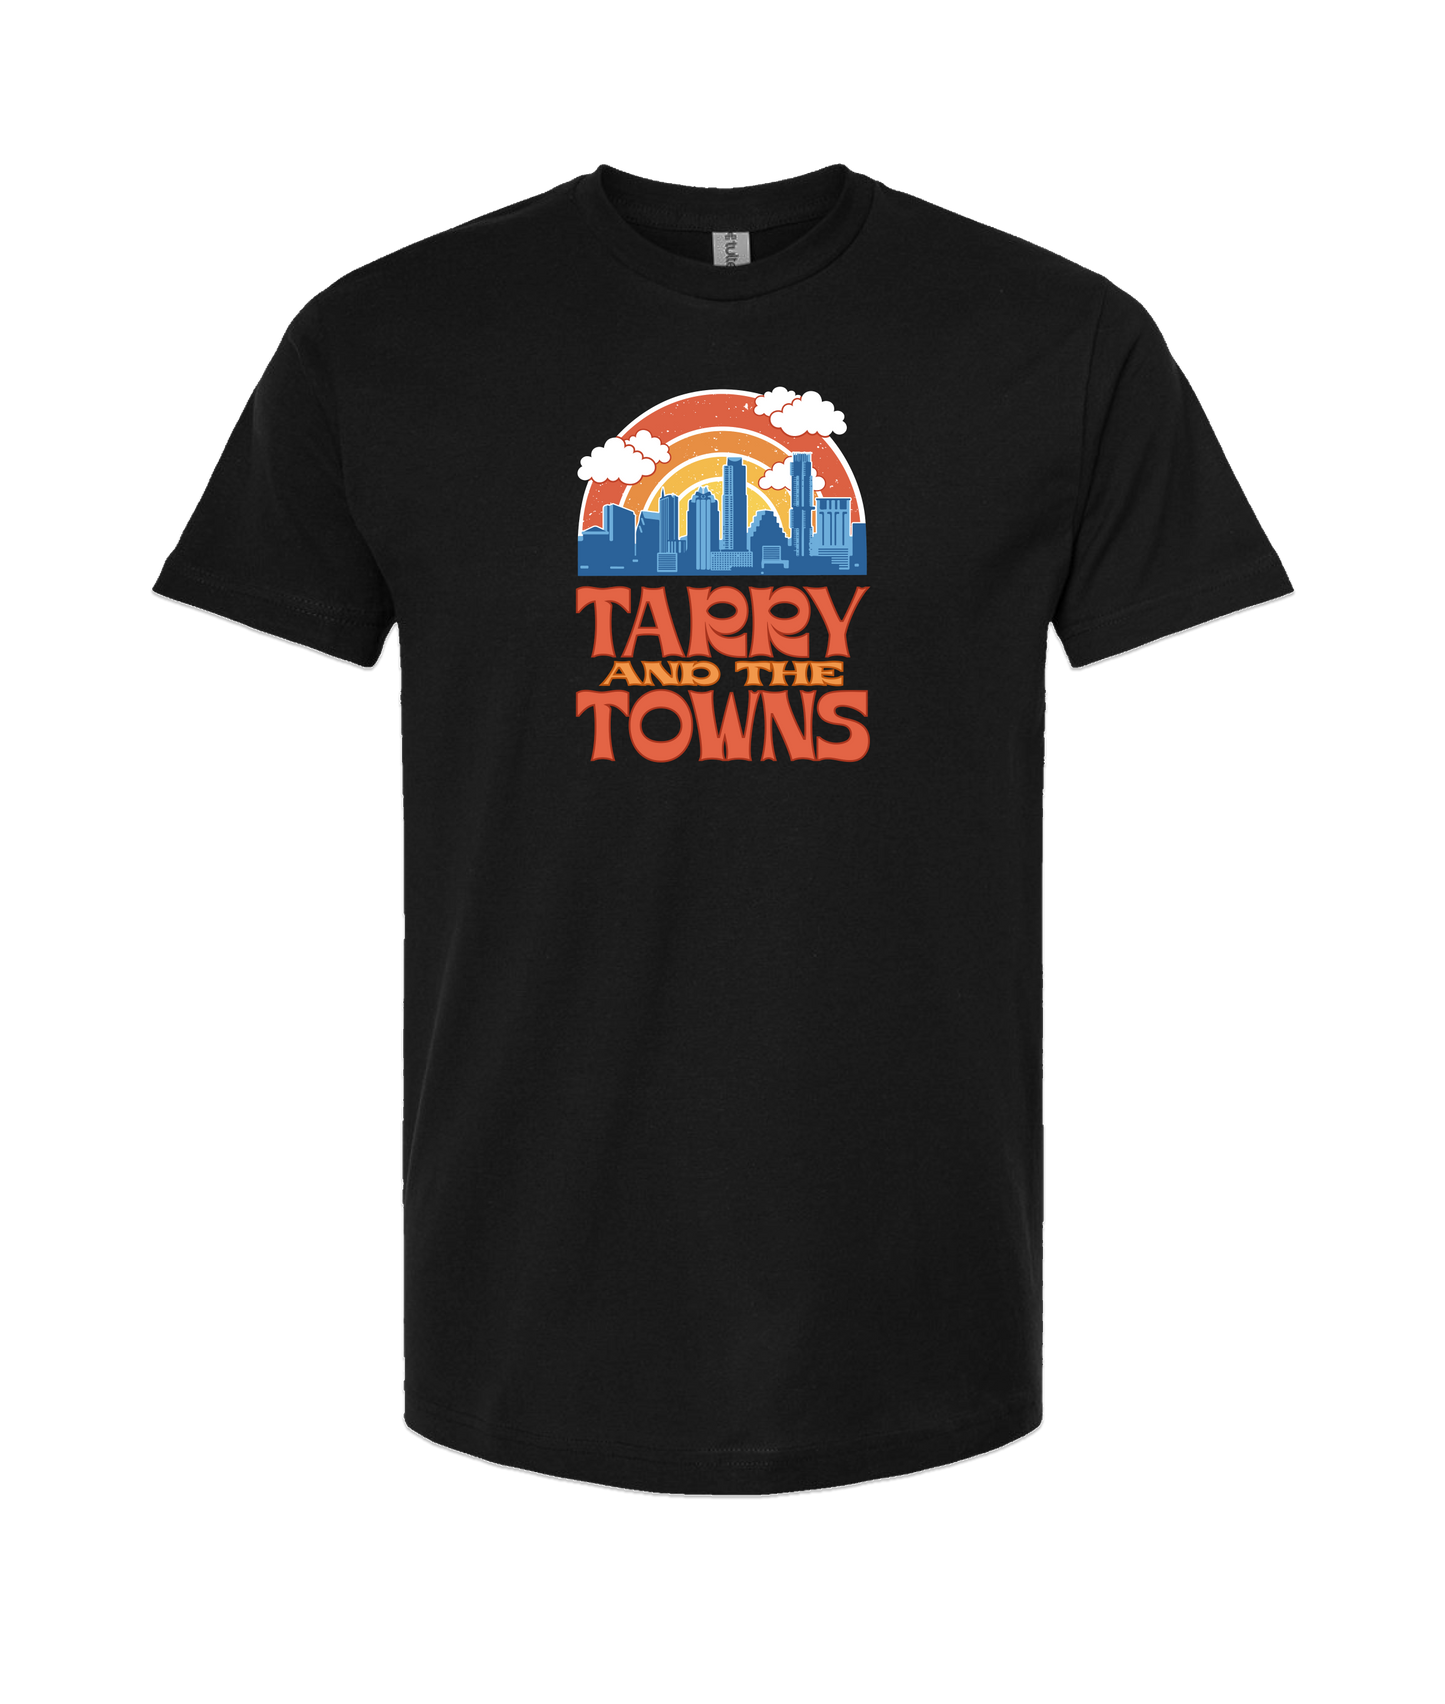 Tarry and the Towns - Cityscape  - Black T-Shirt